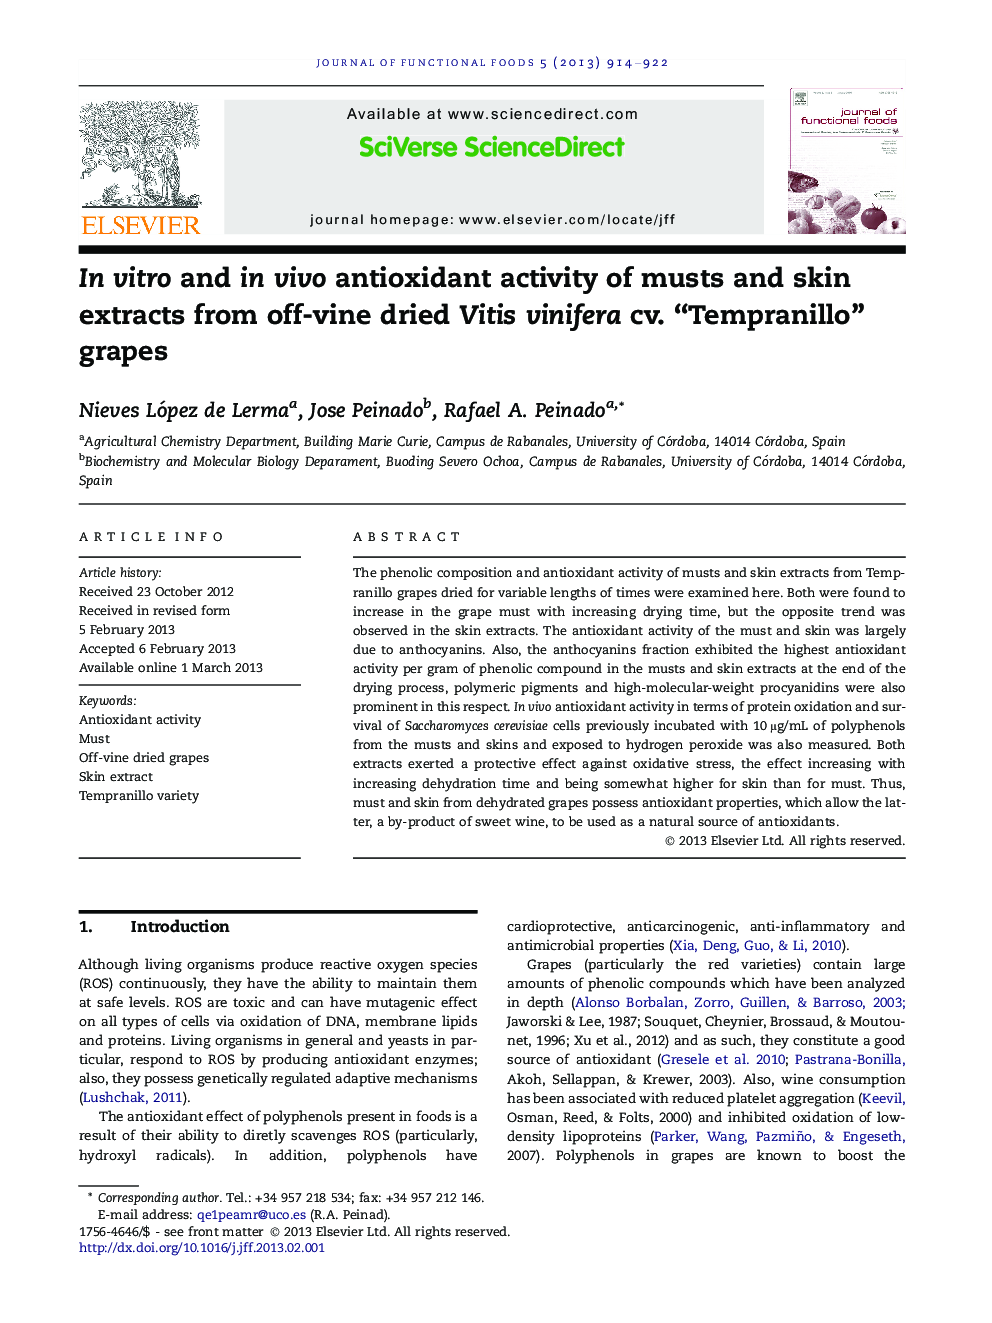 In vitro and in vivo antioxidant activity of musts and skin extracts from off-vine dried Vitis vinifera cv. “Tempranillo” grapes